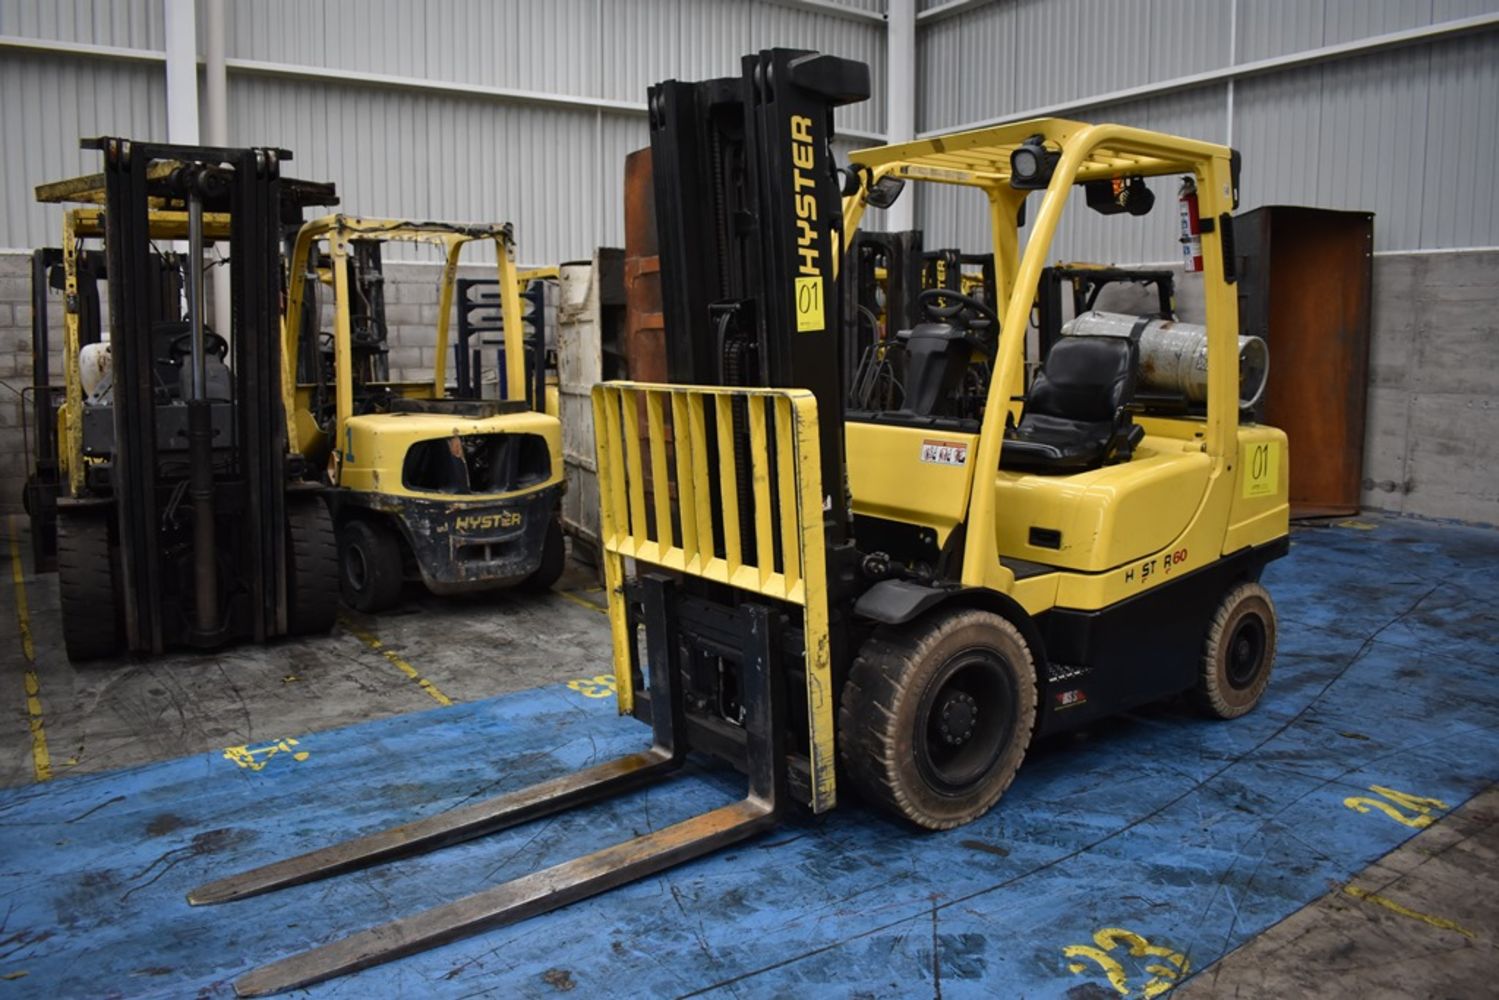 Forklifts! - More than 70 Yale and Hyster Models, Kuka Articuled Robots, complete waterjet cutting line and much more!!